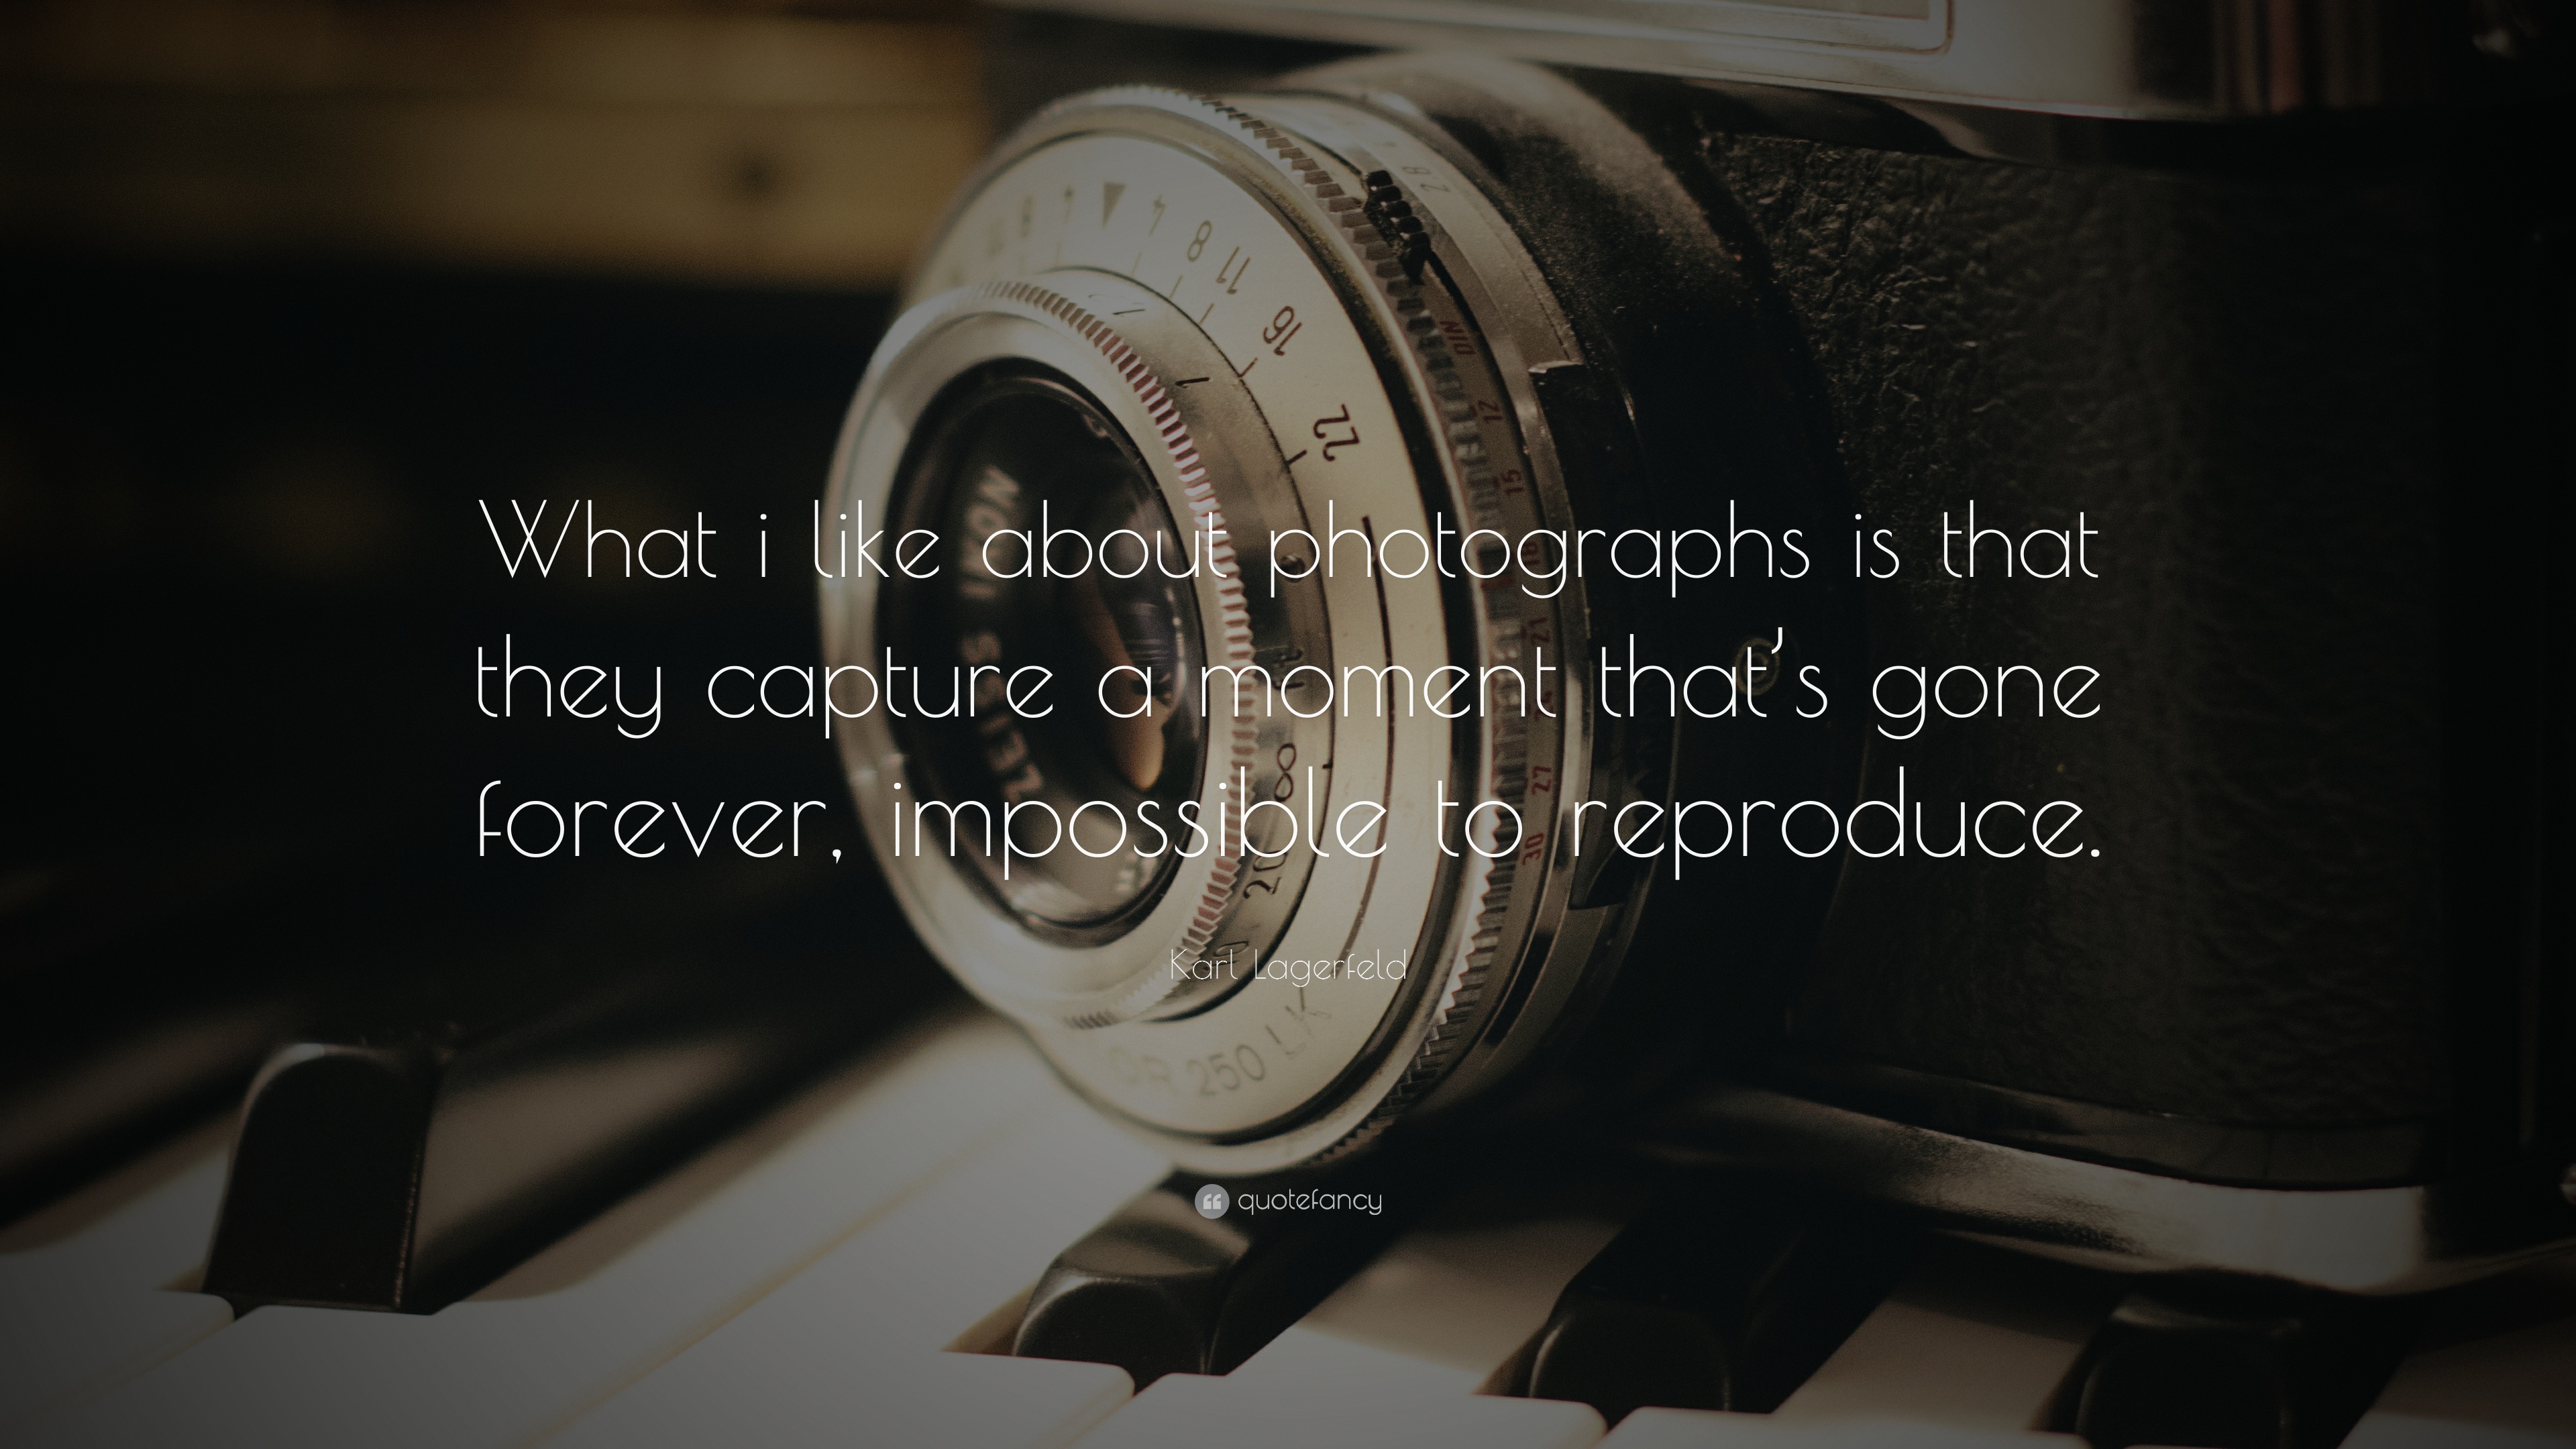 What i like about photographs is that they capture a moment that’s gone forever, impossible to reproduce. Karl Lagerfeld